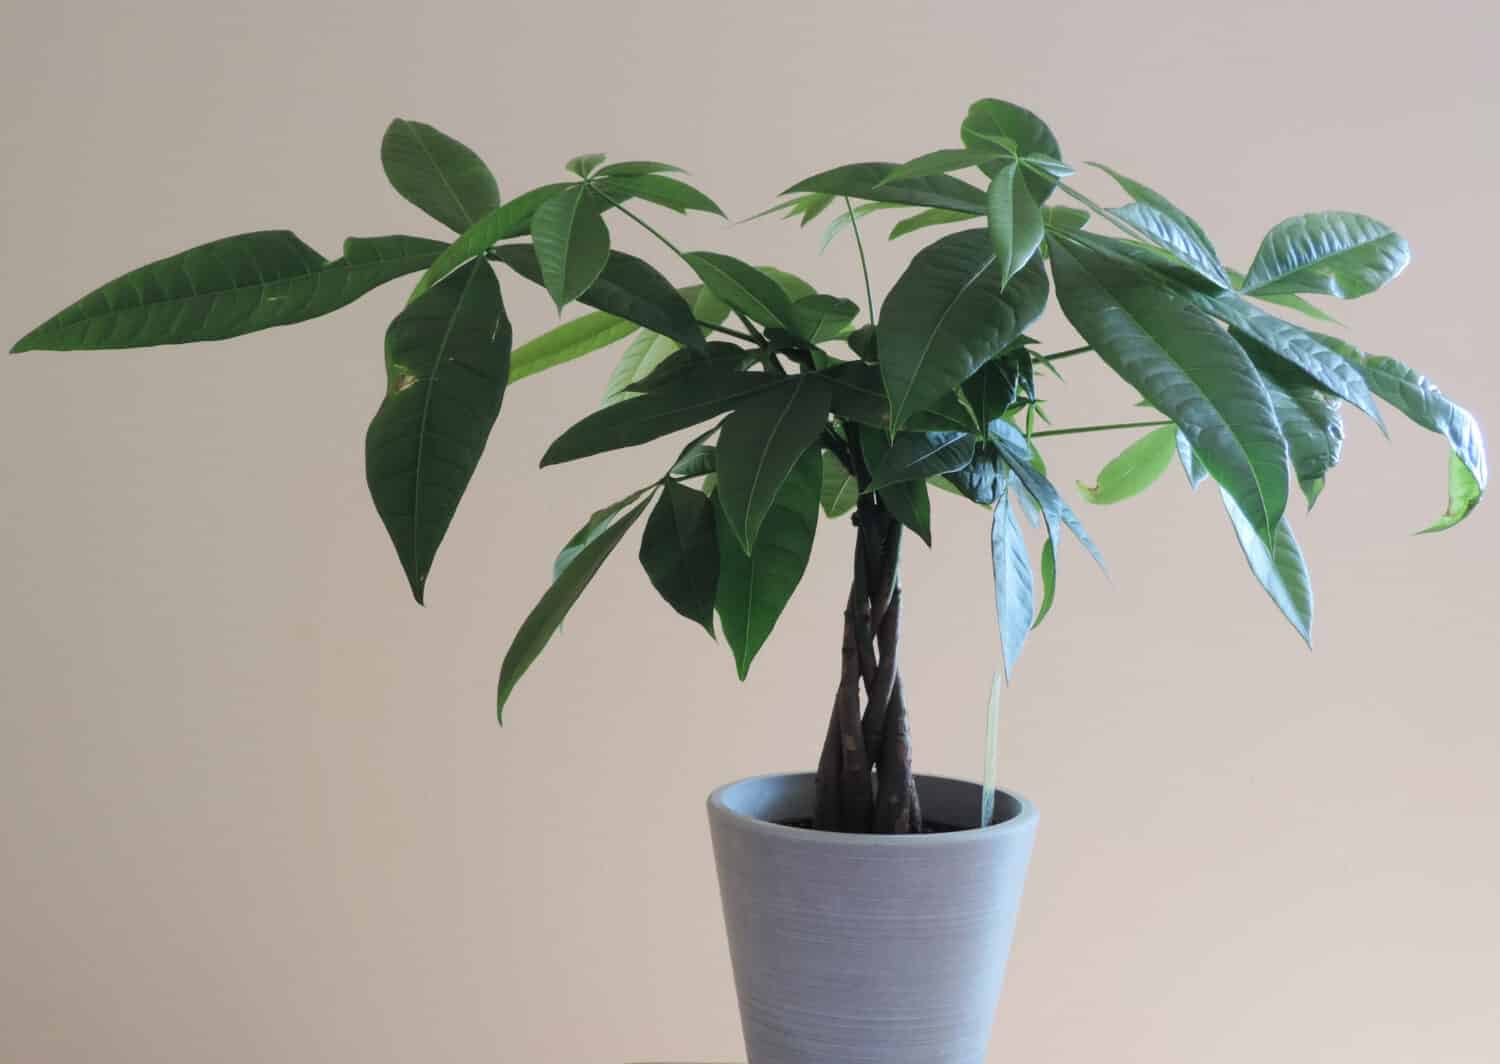 A Money Tree Plant with Ornate Braided Trunk in a white pot on a white background